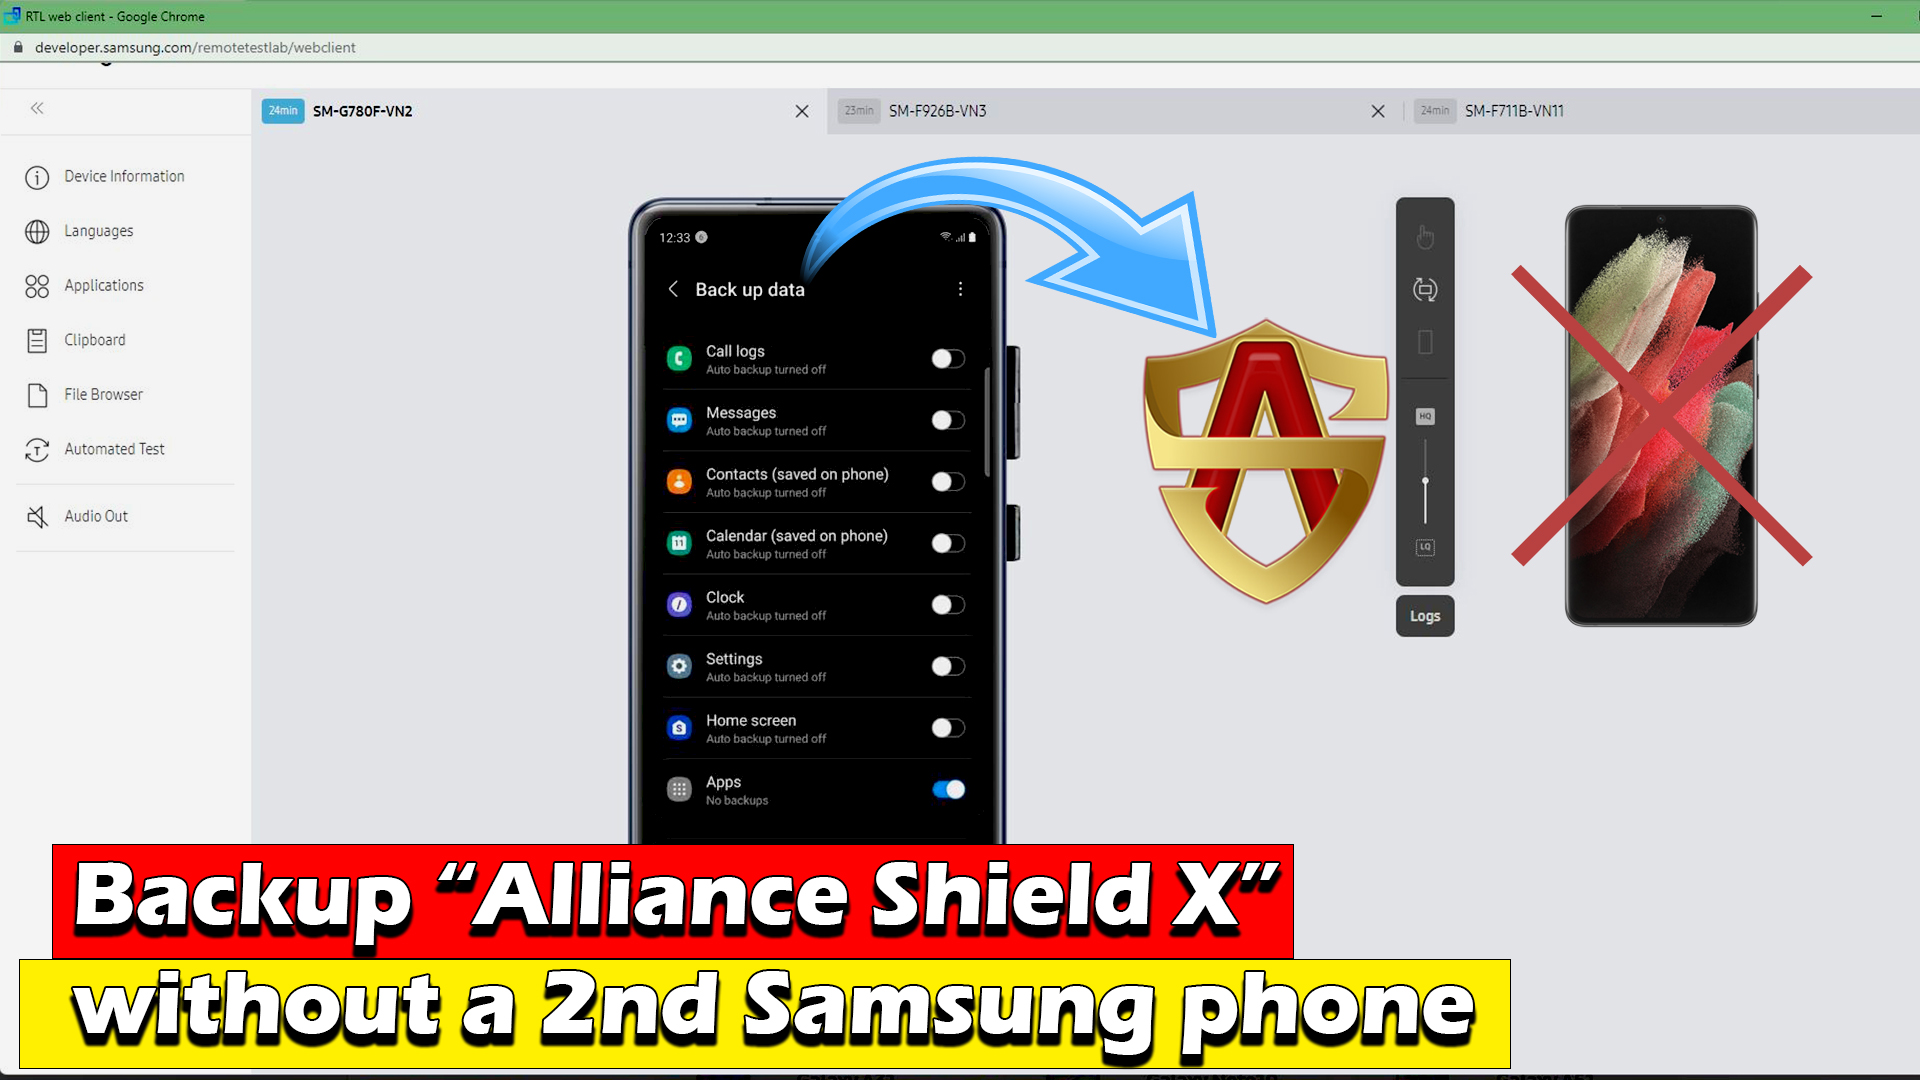 Alliance Shield X Not Working, Samsung Android 11 FRP